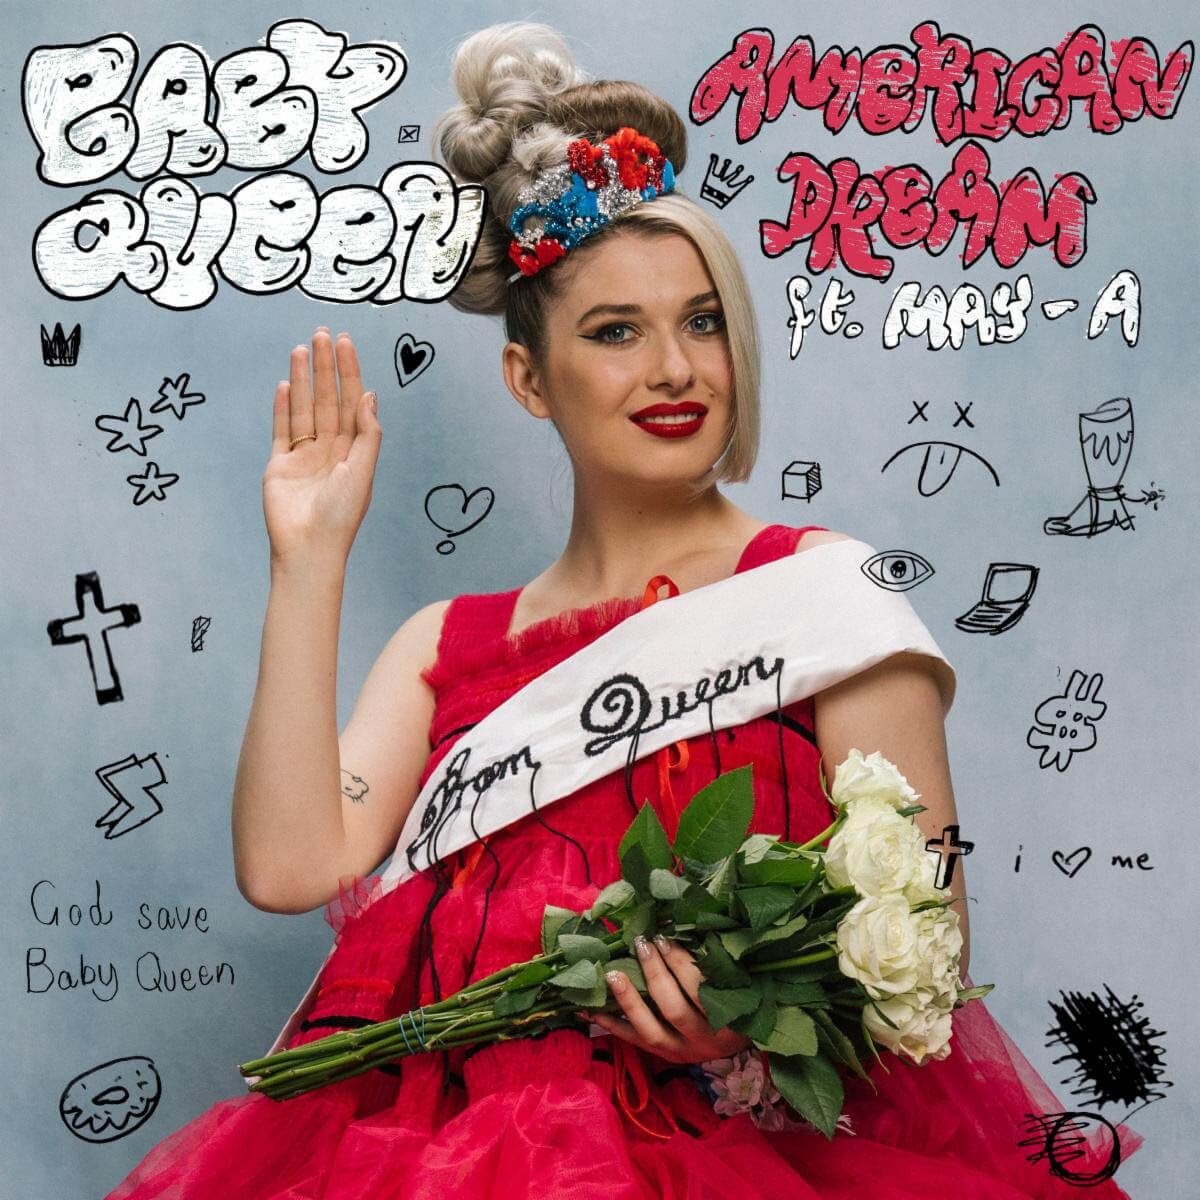 Baby Queen has shared her new single “American Dream,” featuring Australian artist MAY-A. The track is now out via Island Records/Slowplay